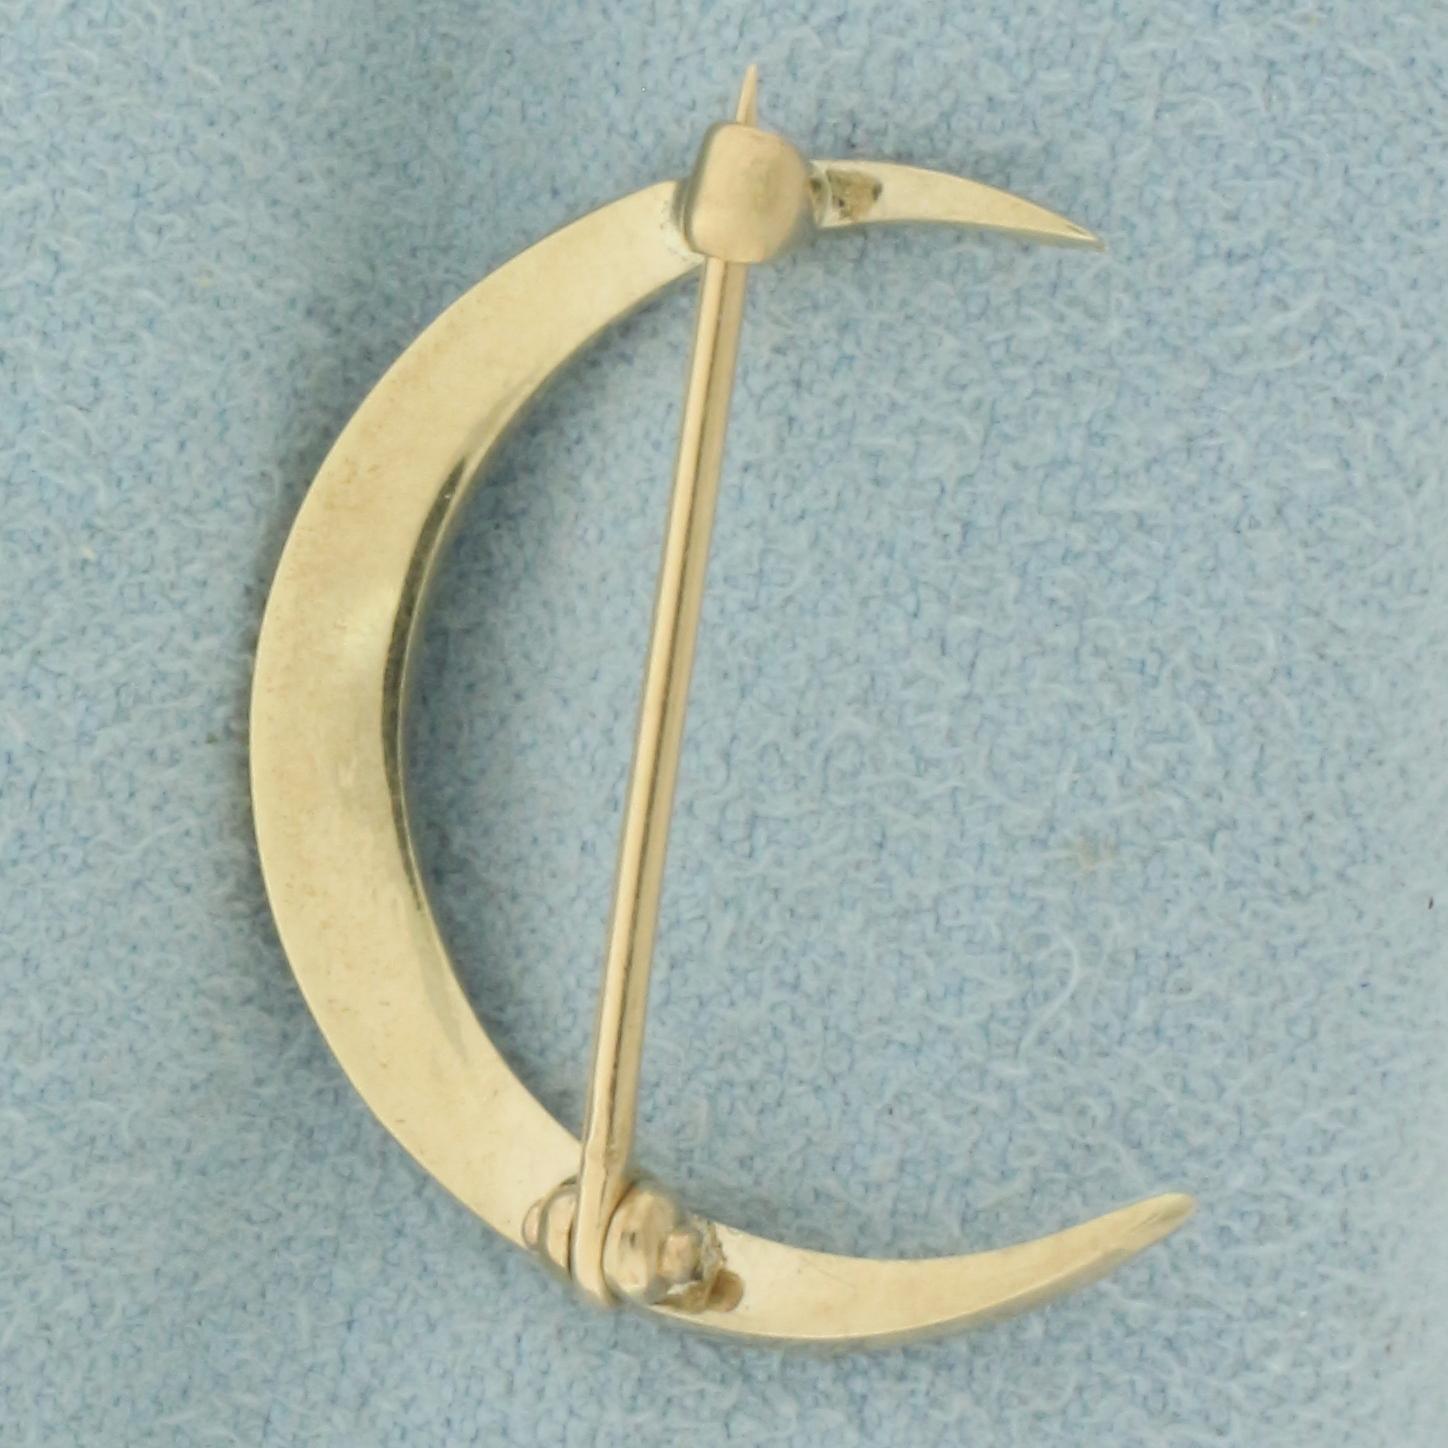 Antique Seed Pear Crescent Moon Pin Brooch In 14k Yellow Gold